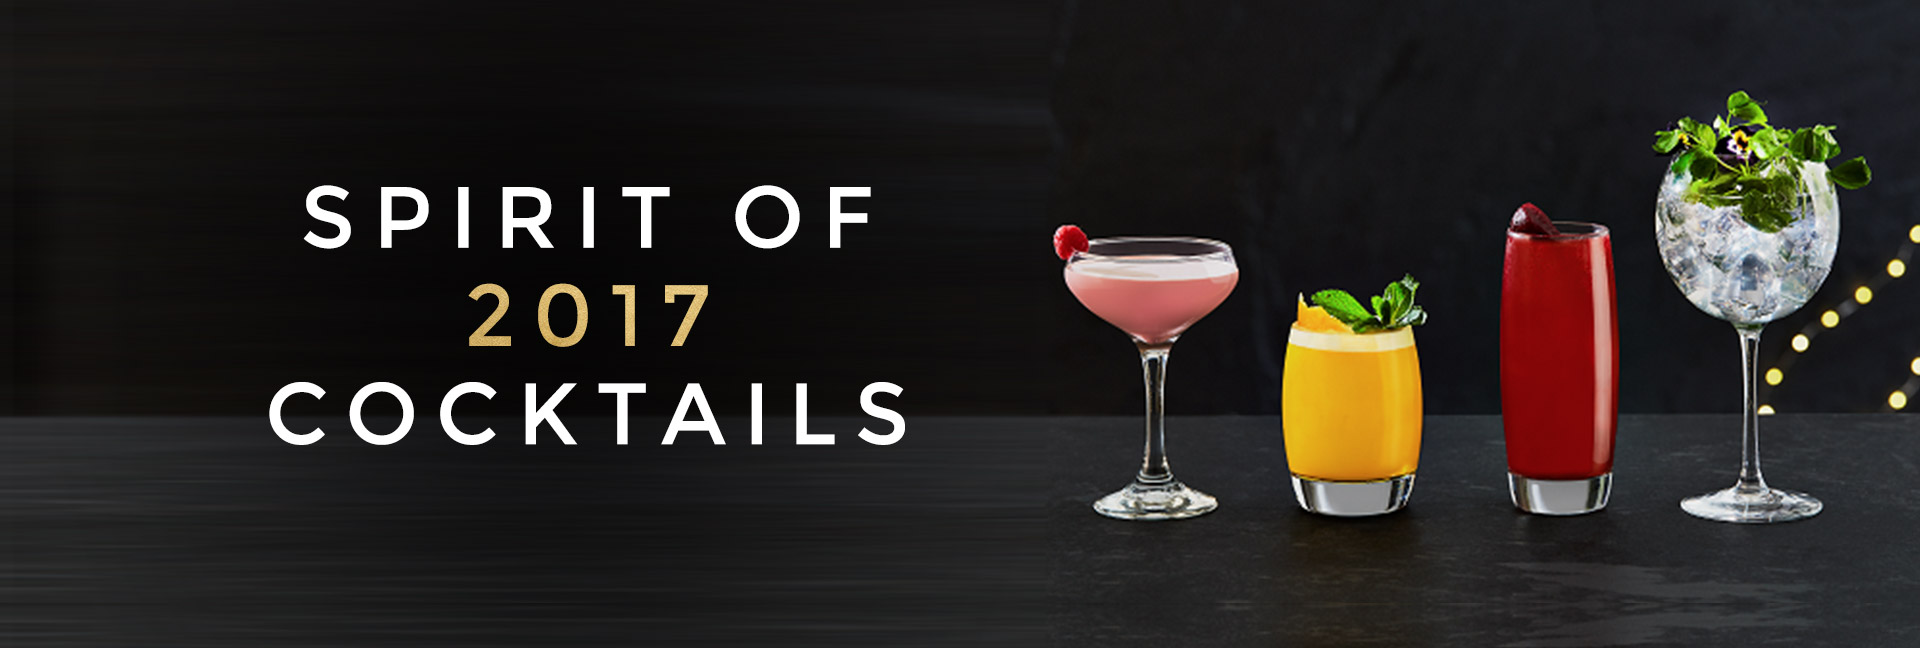 Spirit of 2017 cocktails at All Bar One Guildford